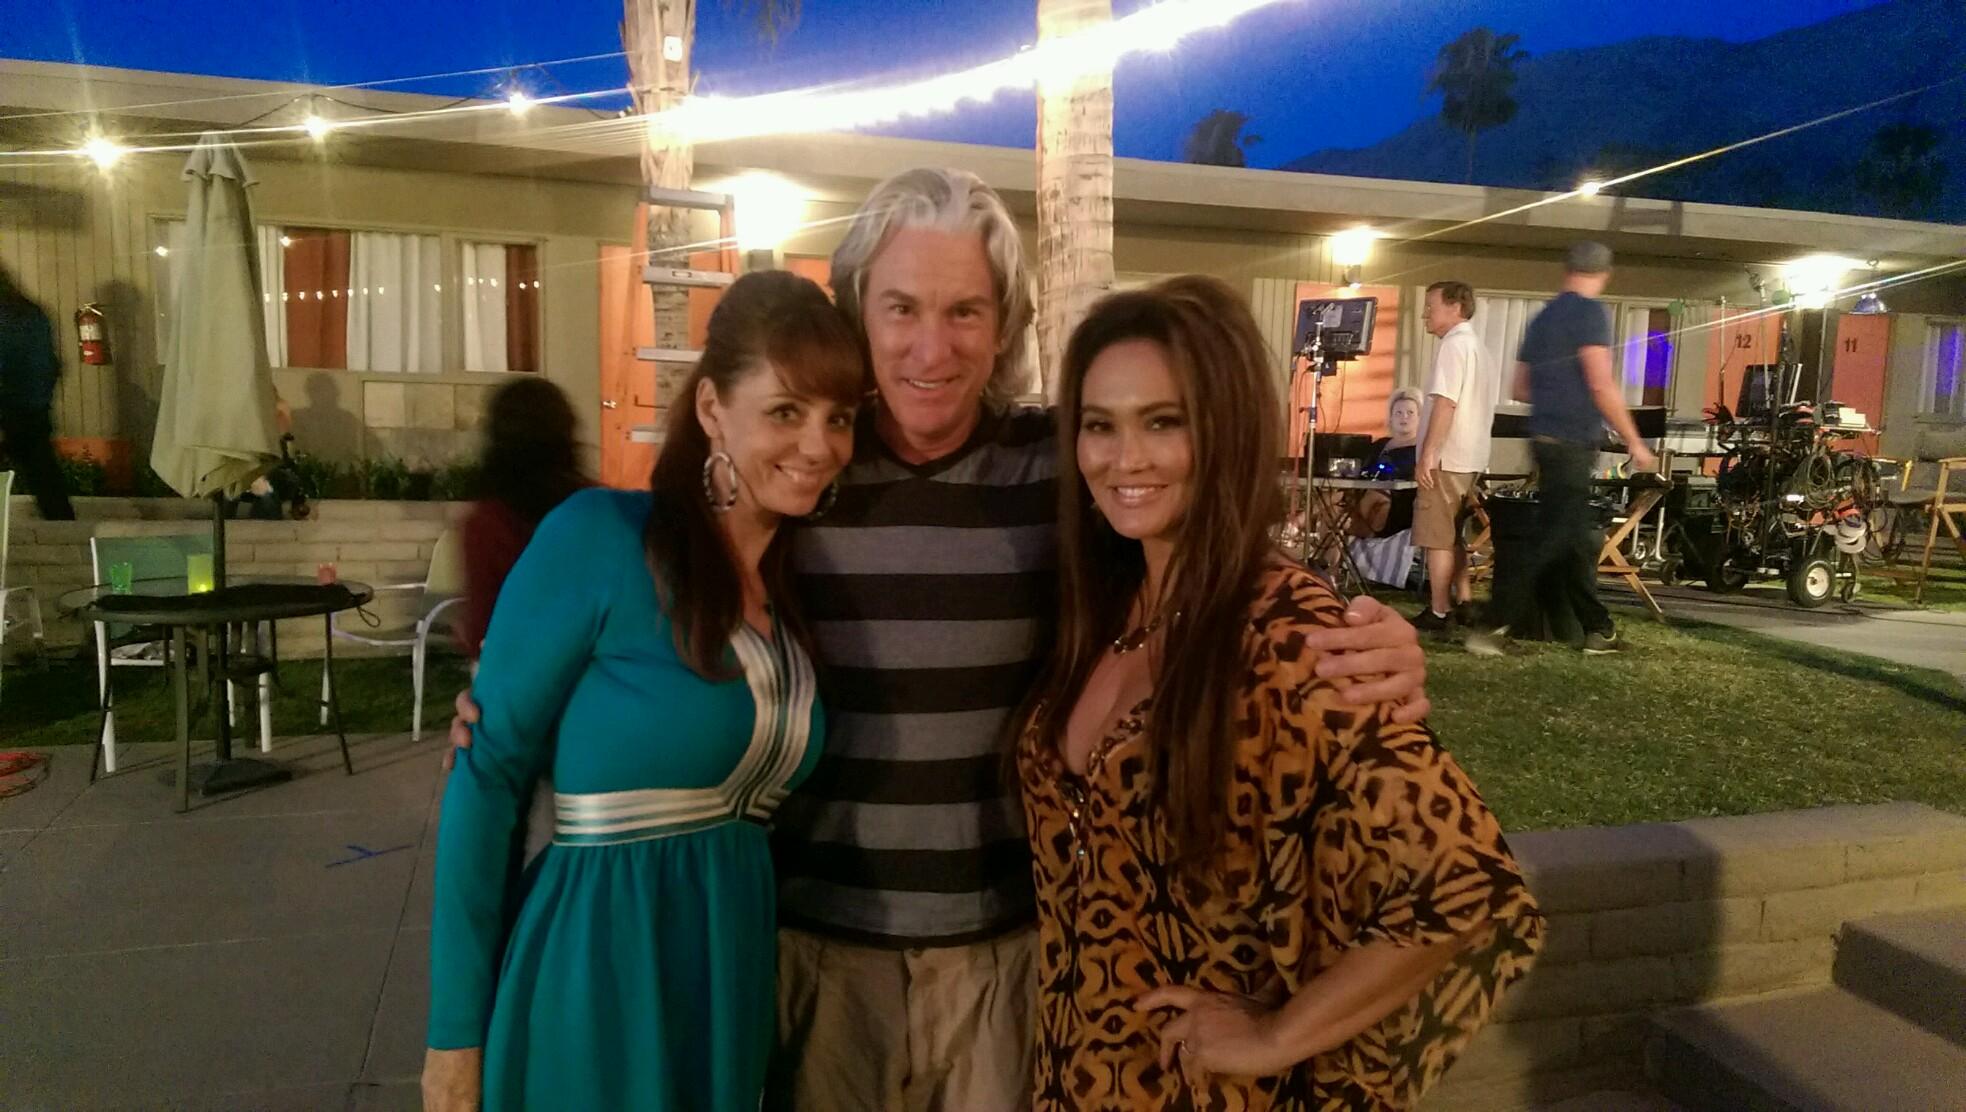 Photos from Palm Swings, with Tia Carrere and David Stanford.